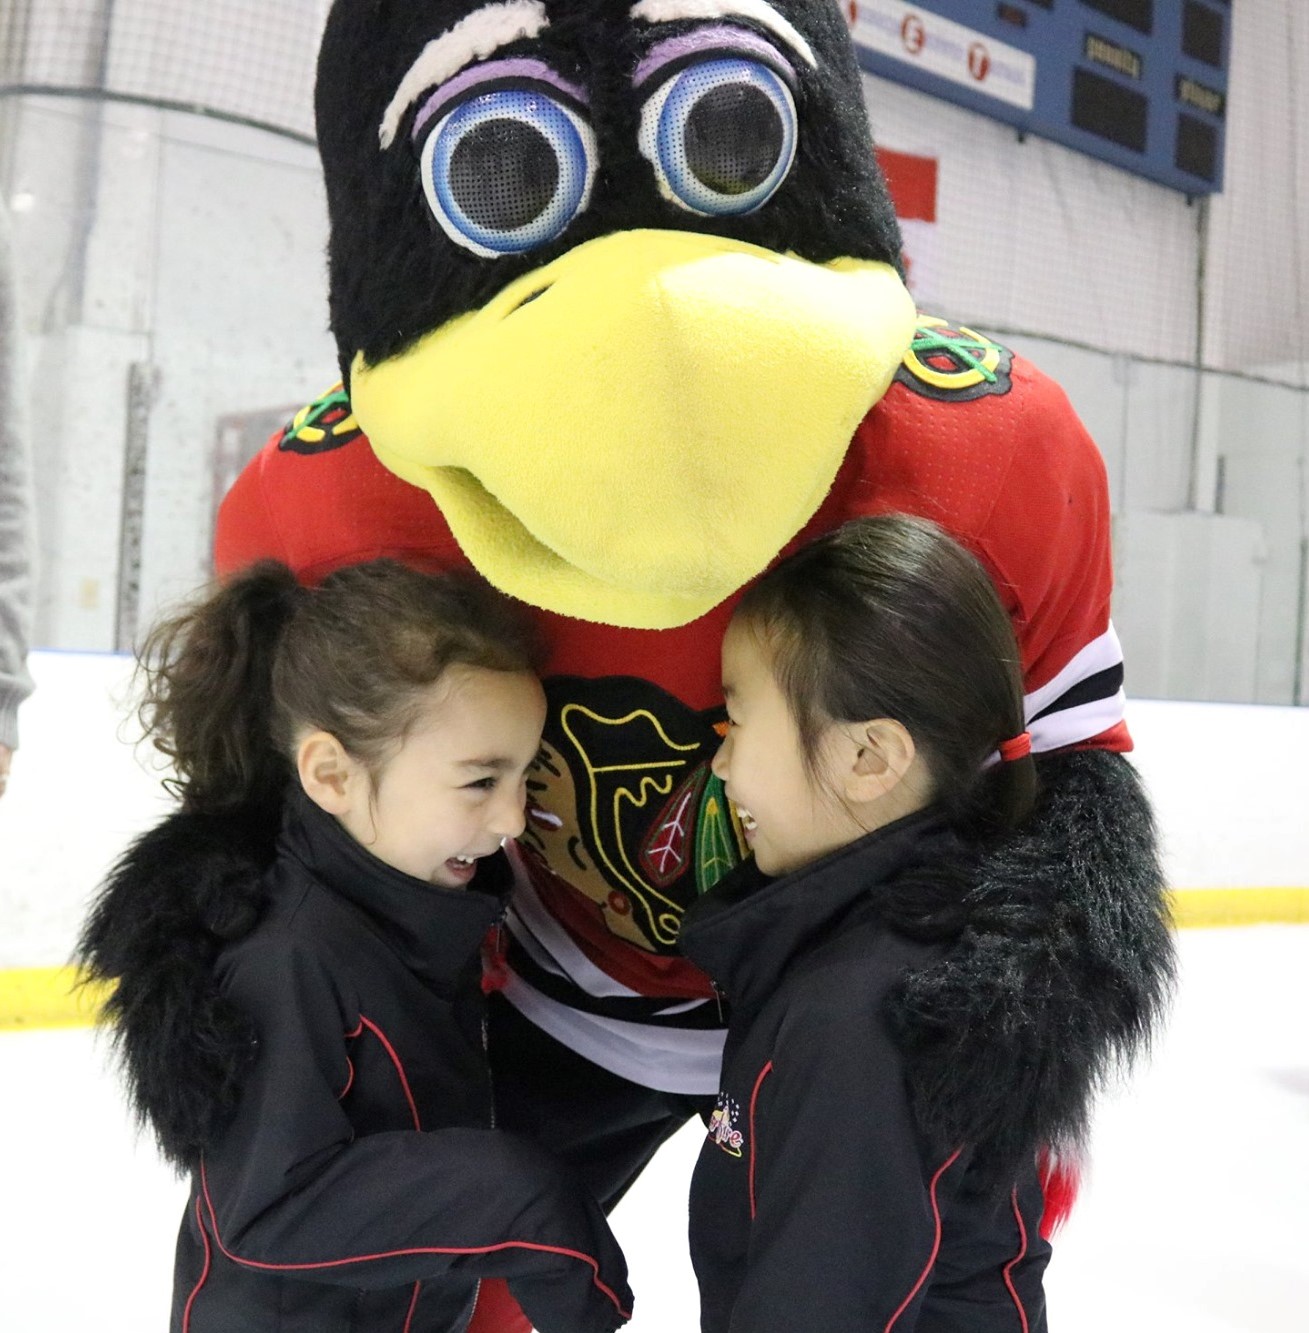 Blackhawk's mascot Tommy Hawk ice skated with Rocket Ice customers. Fun with Tommy Hawk at Rocket Ice Skating Rink